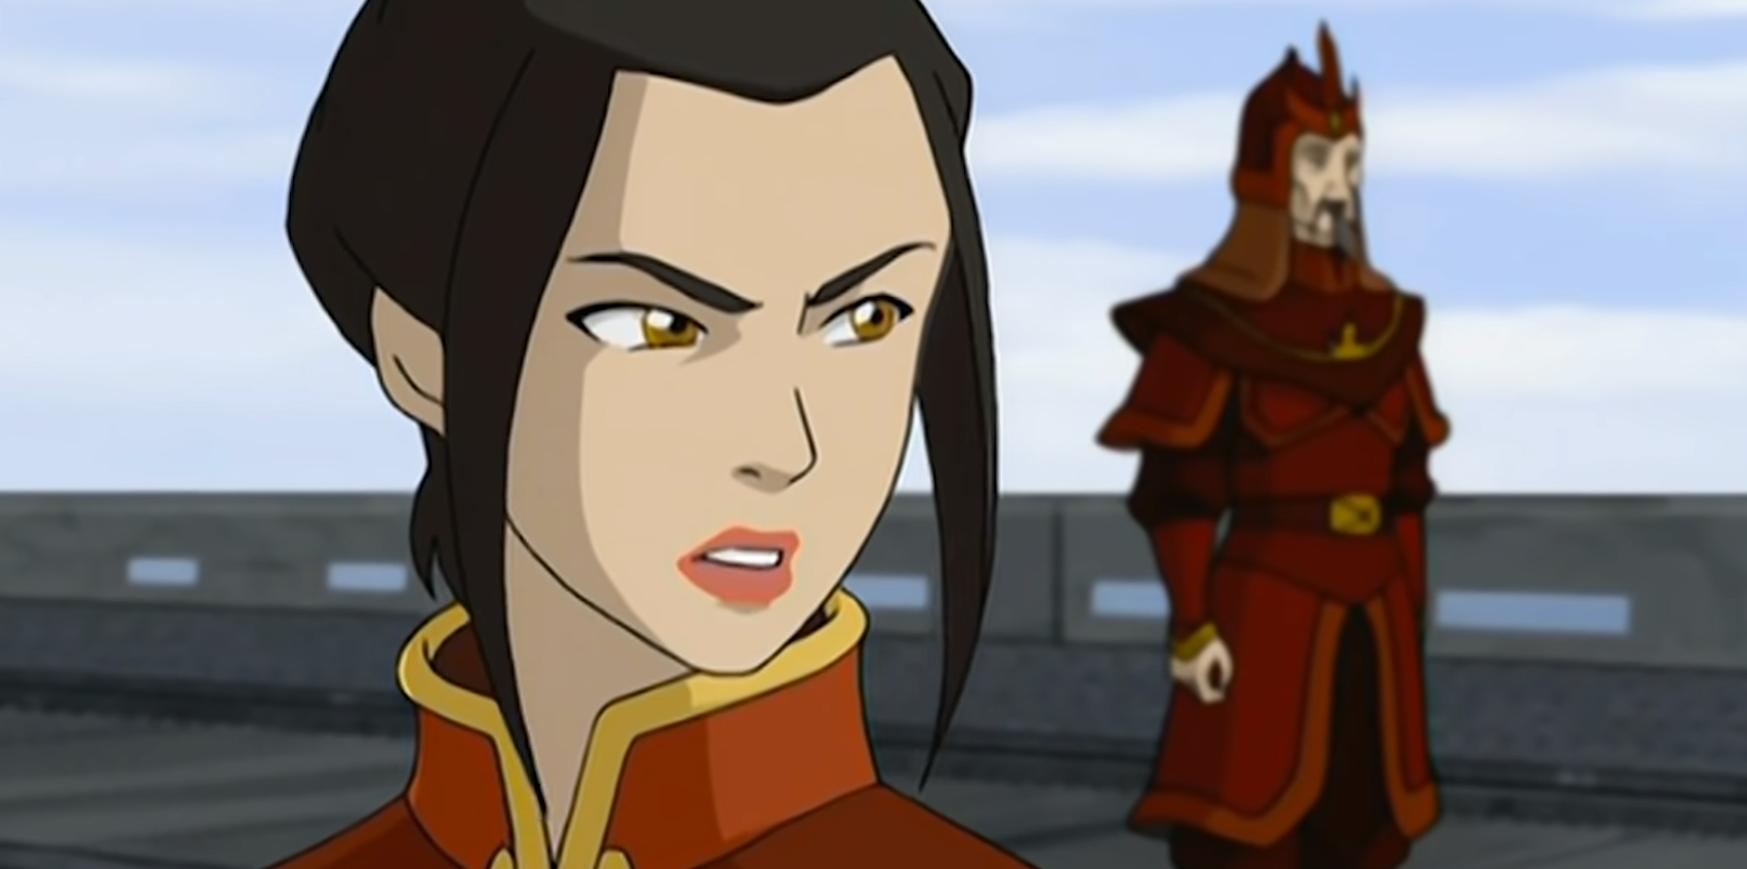 Azula looking angry in Avatar